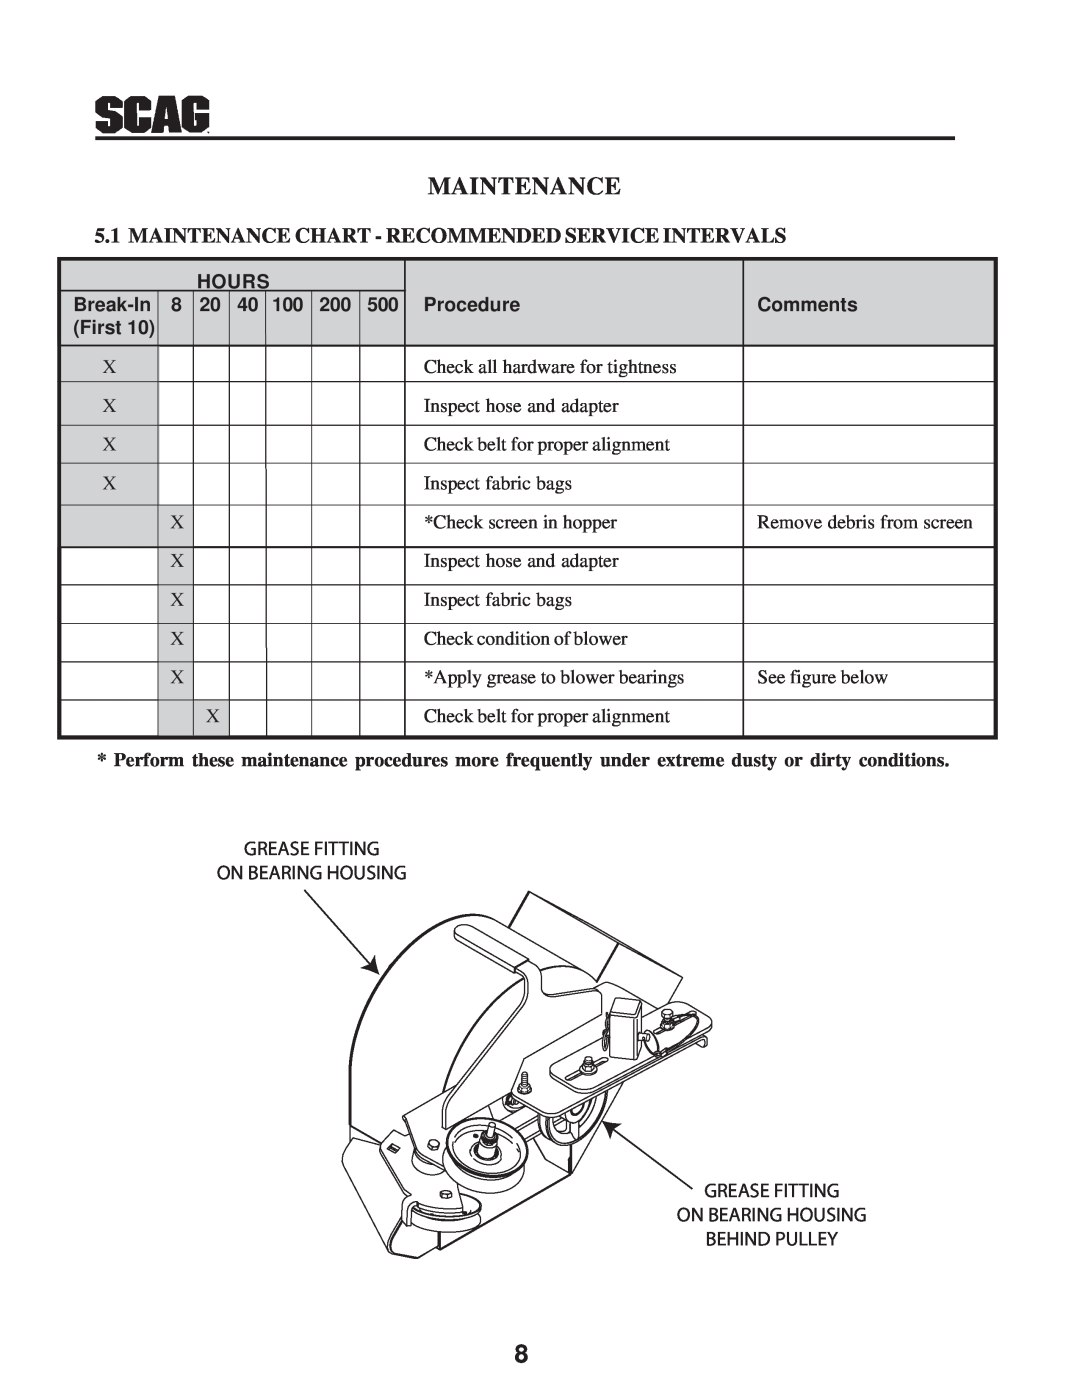 Scag Power Equipment GC-STT-V Maintenance Chart - Recommended Service Intervals, Hours, Break-In, Procedure, Comments 